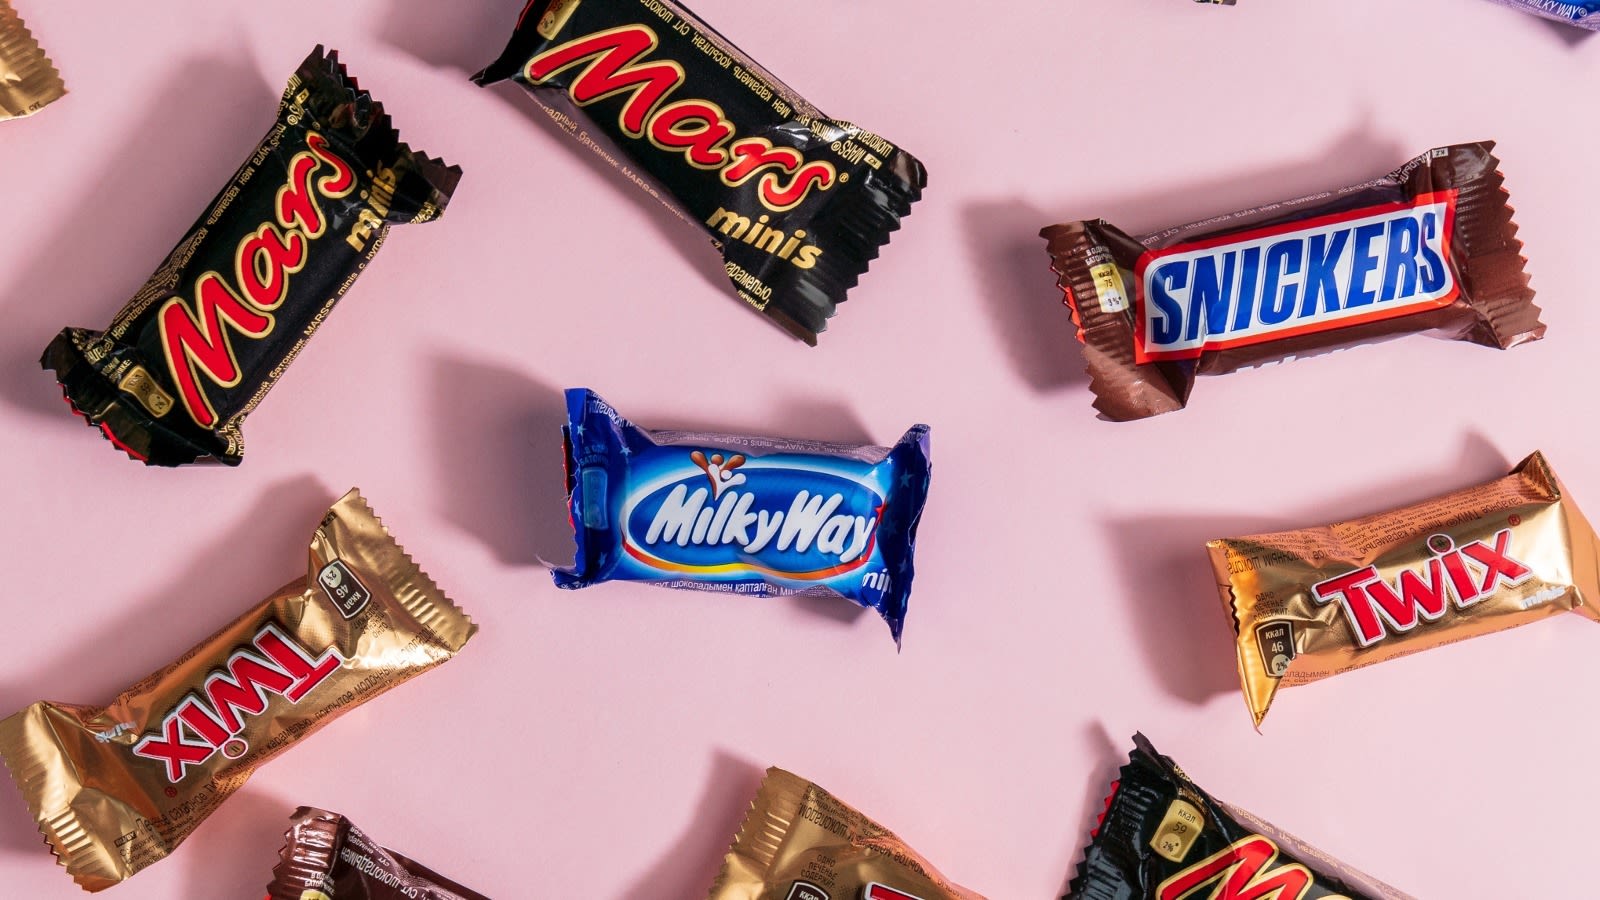 The Most Popular Candy Bar In The US Probably Won't Come As A Surprise